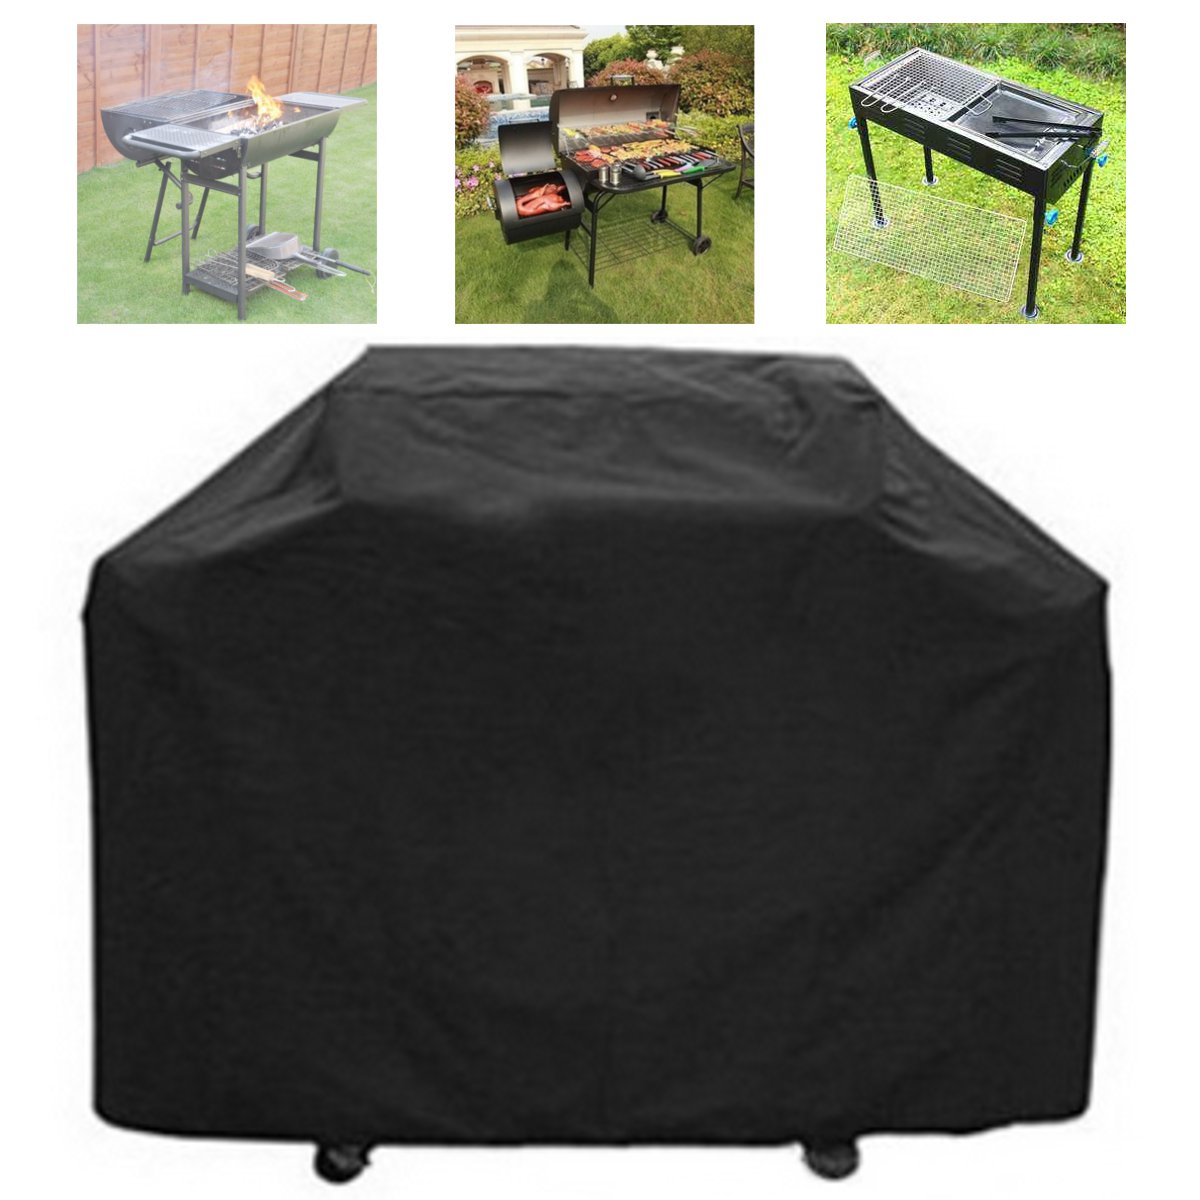 59 Inch BBQ Grill Barbecue Waterproof Cover Heavy Duty UV Protector Outdoor Yard Camping